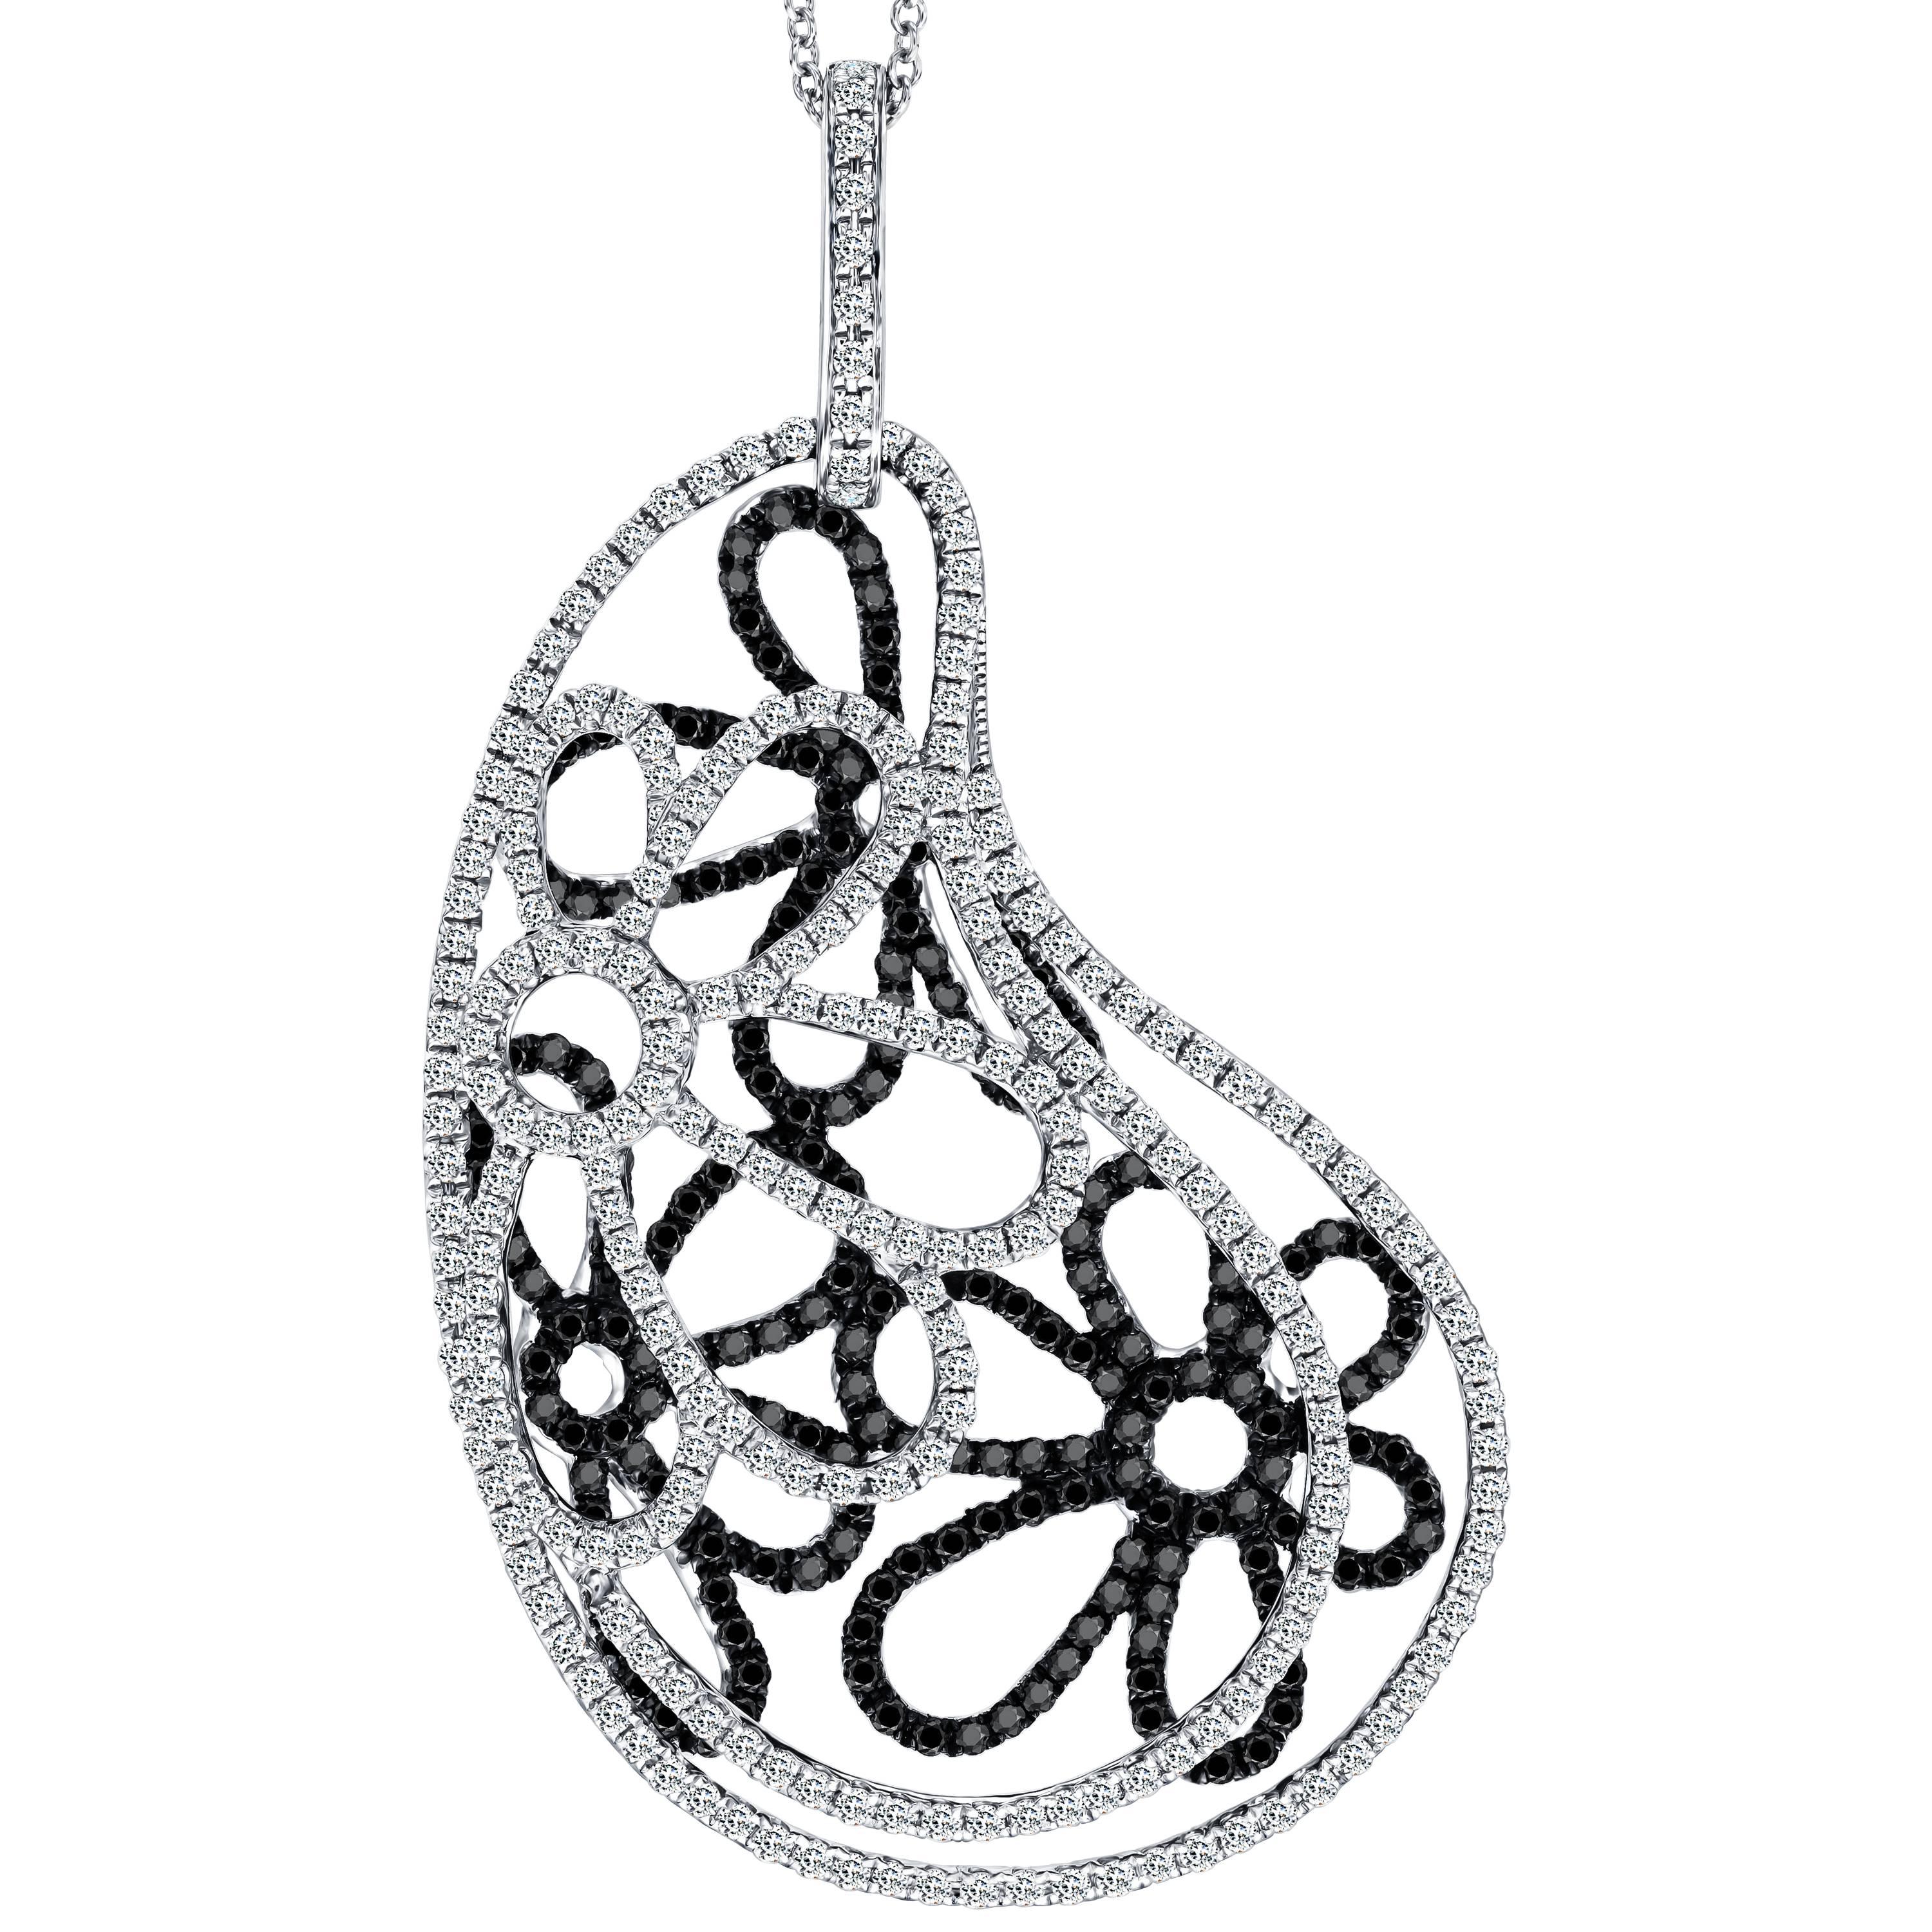 This feminine fancy floral pendant is encrusted with 0.86 carat round brilliant black diamonds, with the flowery pattern of 0.95 carat round brilliant white diamonds . With a total weight of 1.81 carats this beautiful necklace is set in 18 karat